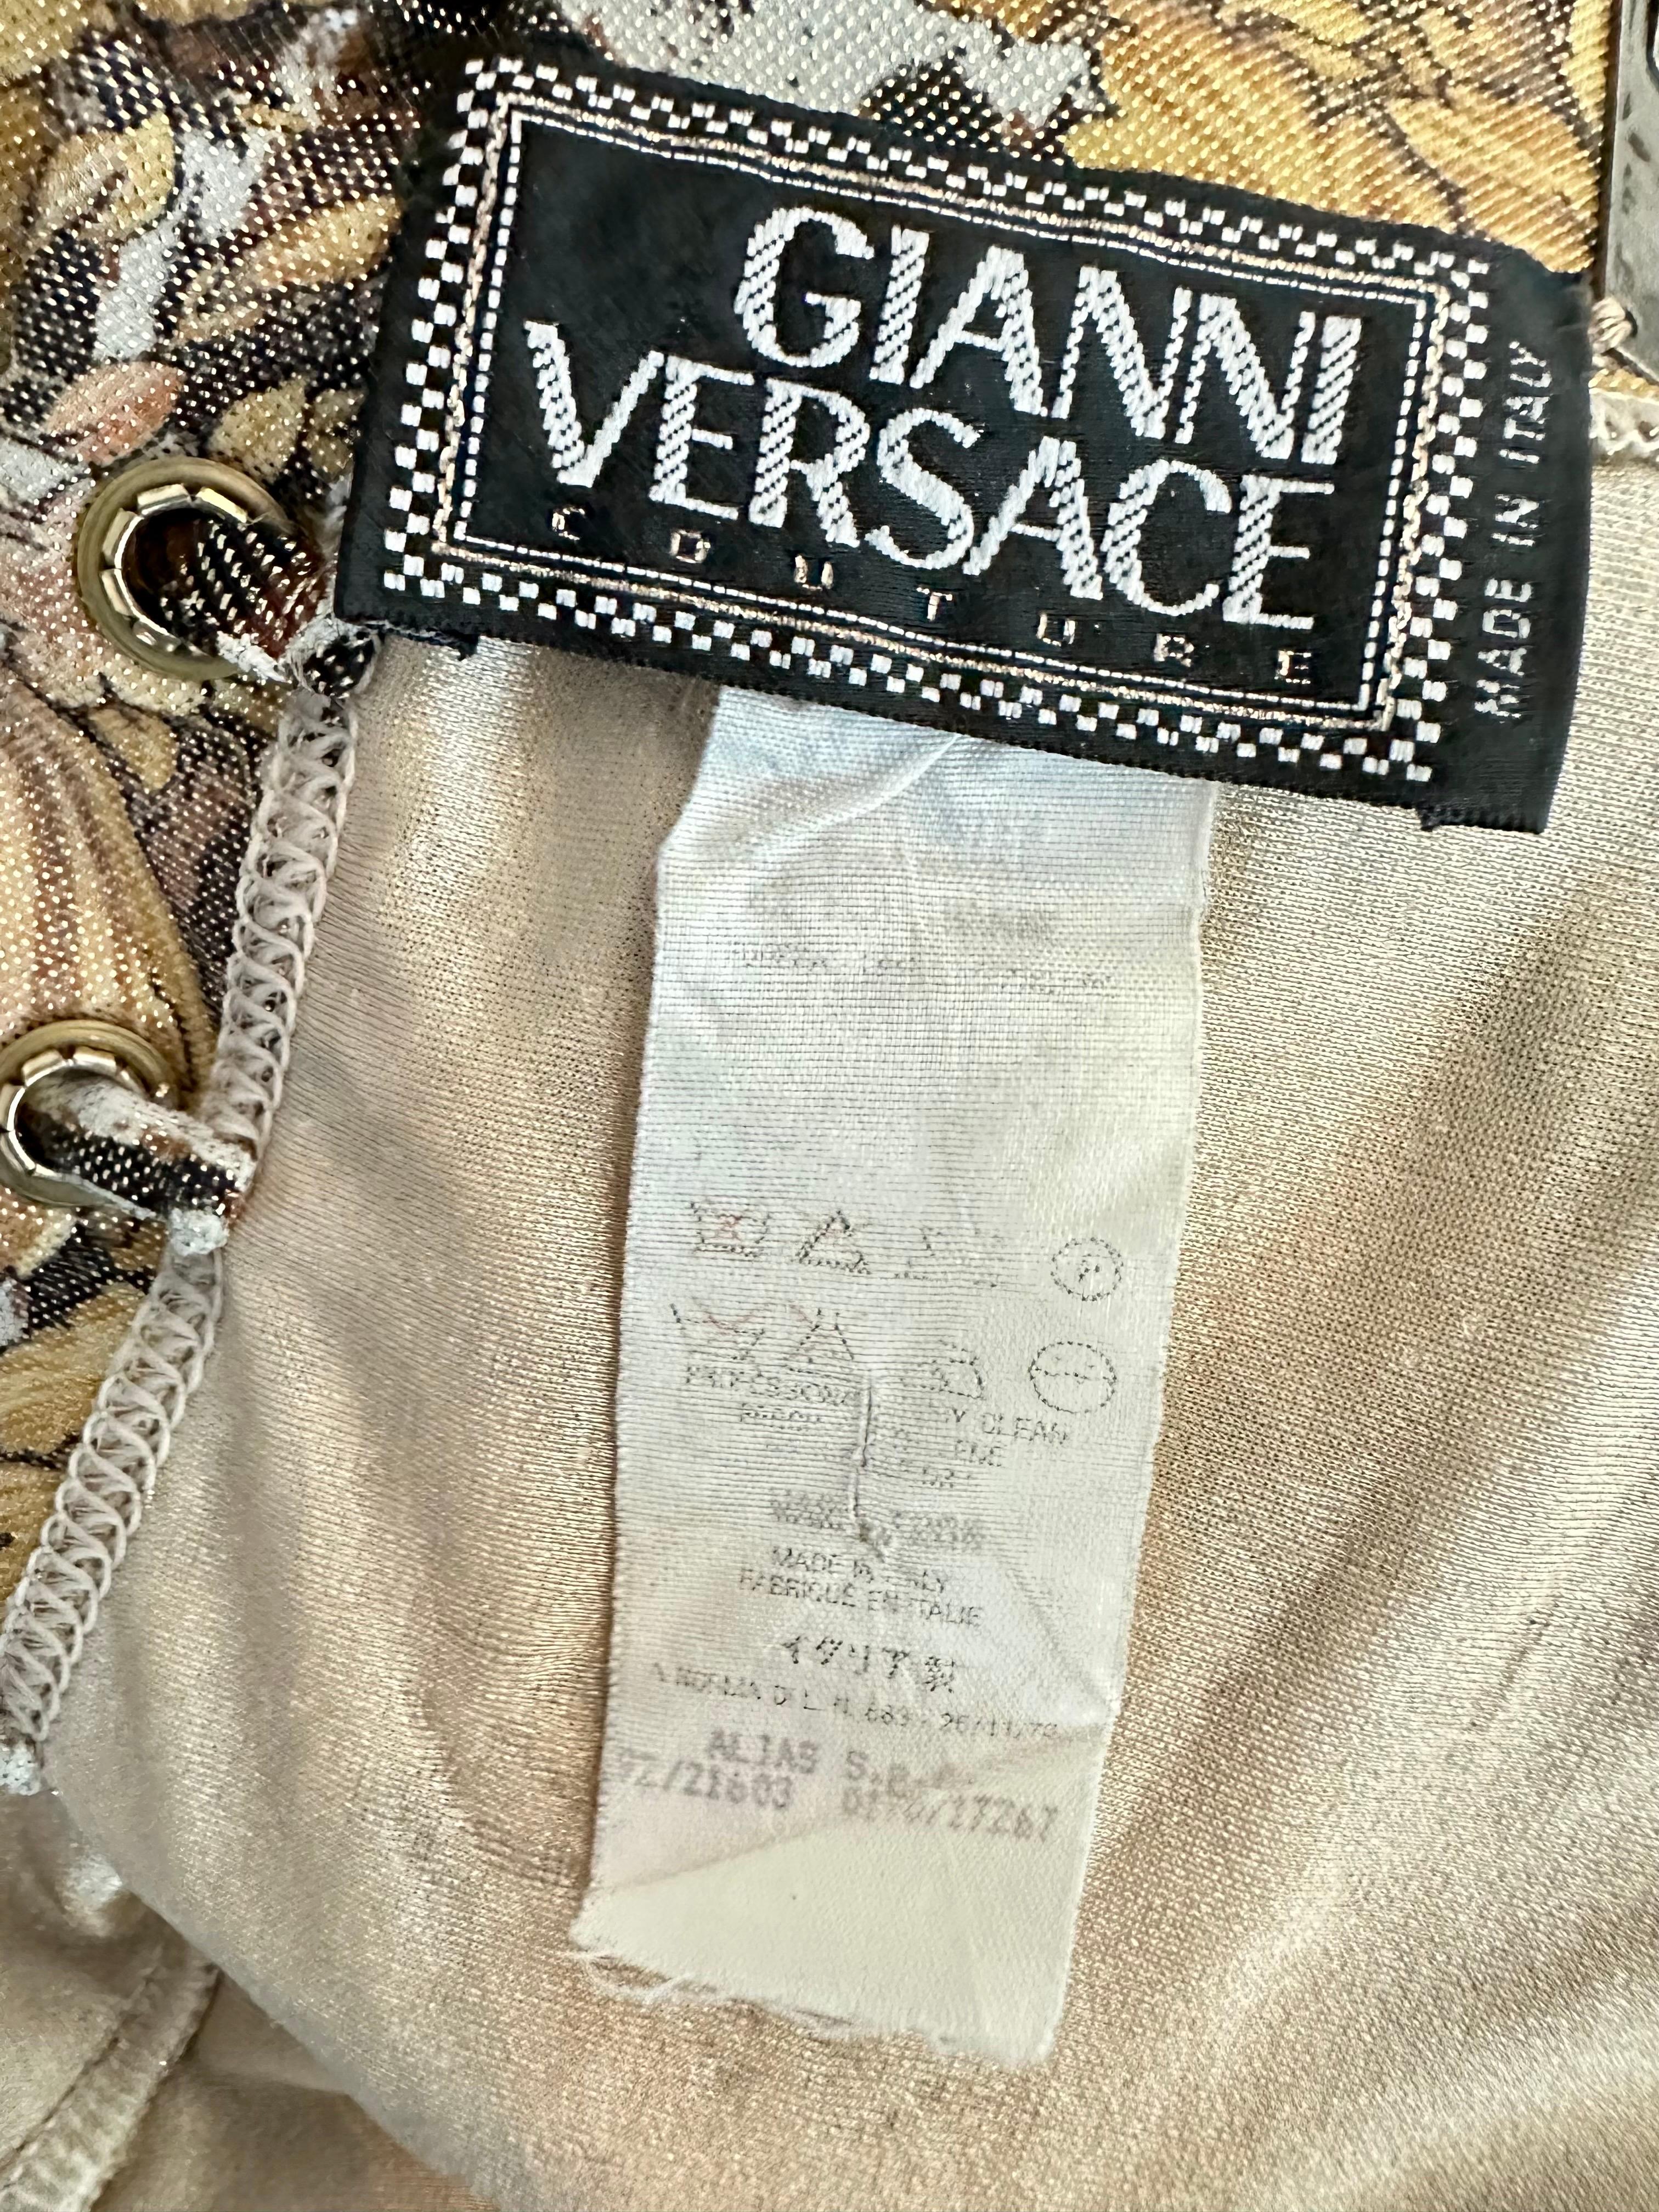 Gianni Versace S/S 1992 Runway Bustier Embellished Baroque Catsuit Jumpsuit For Sale 9